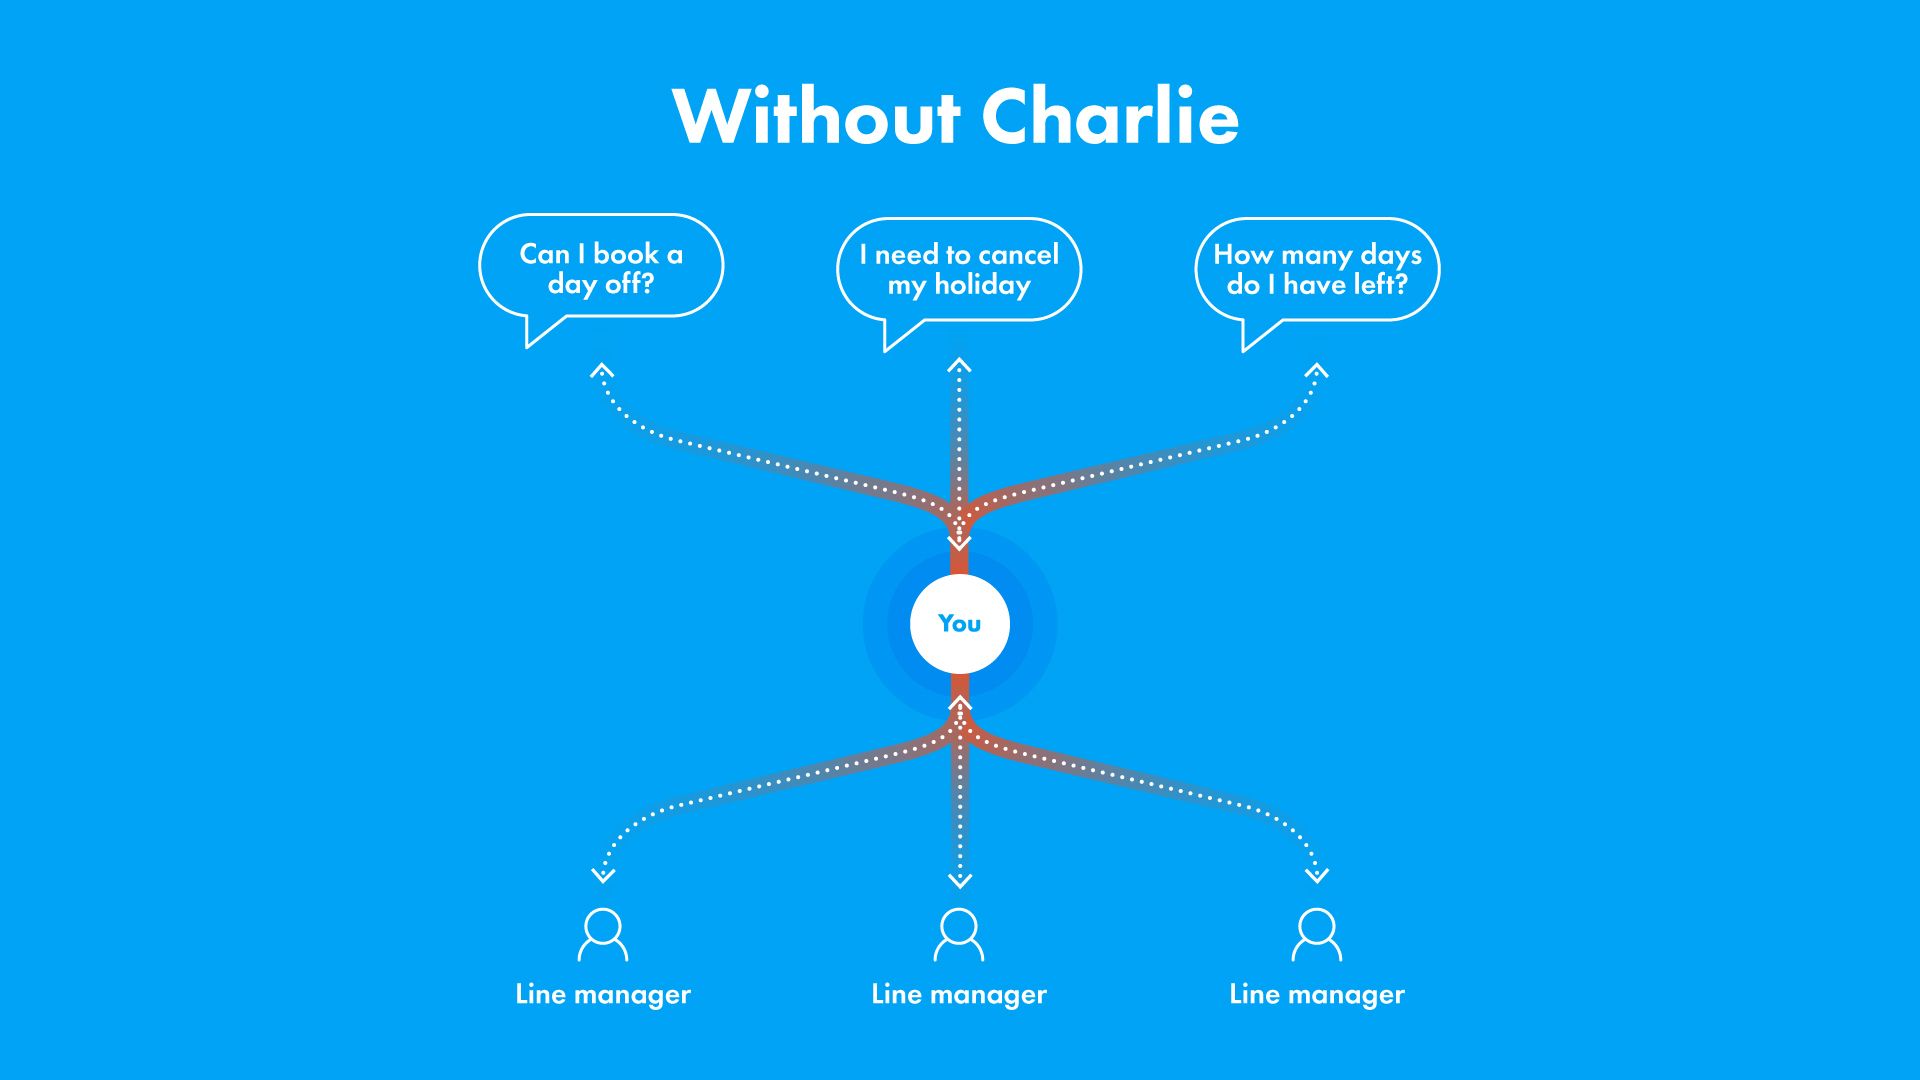 What it's like without Charlie - crowded and hard to manage - graph